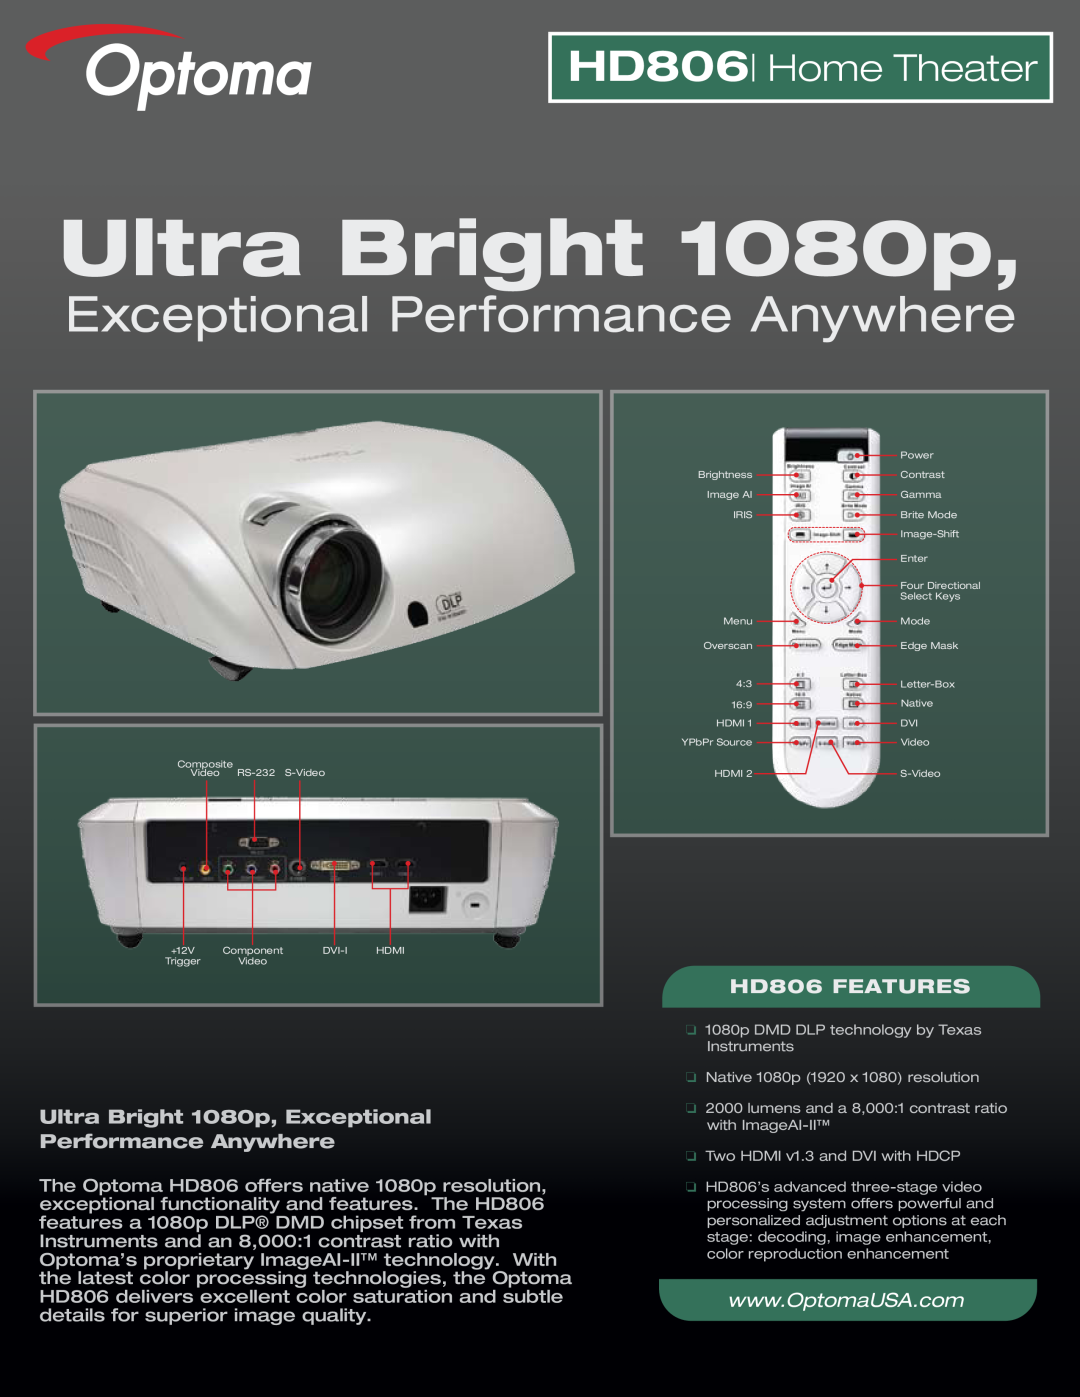 Optoma Technology manual HD806 Home Theater, Ultra Bright 1080p, Exceptional Performance Anywhere, HD806 FEATURES 